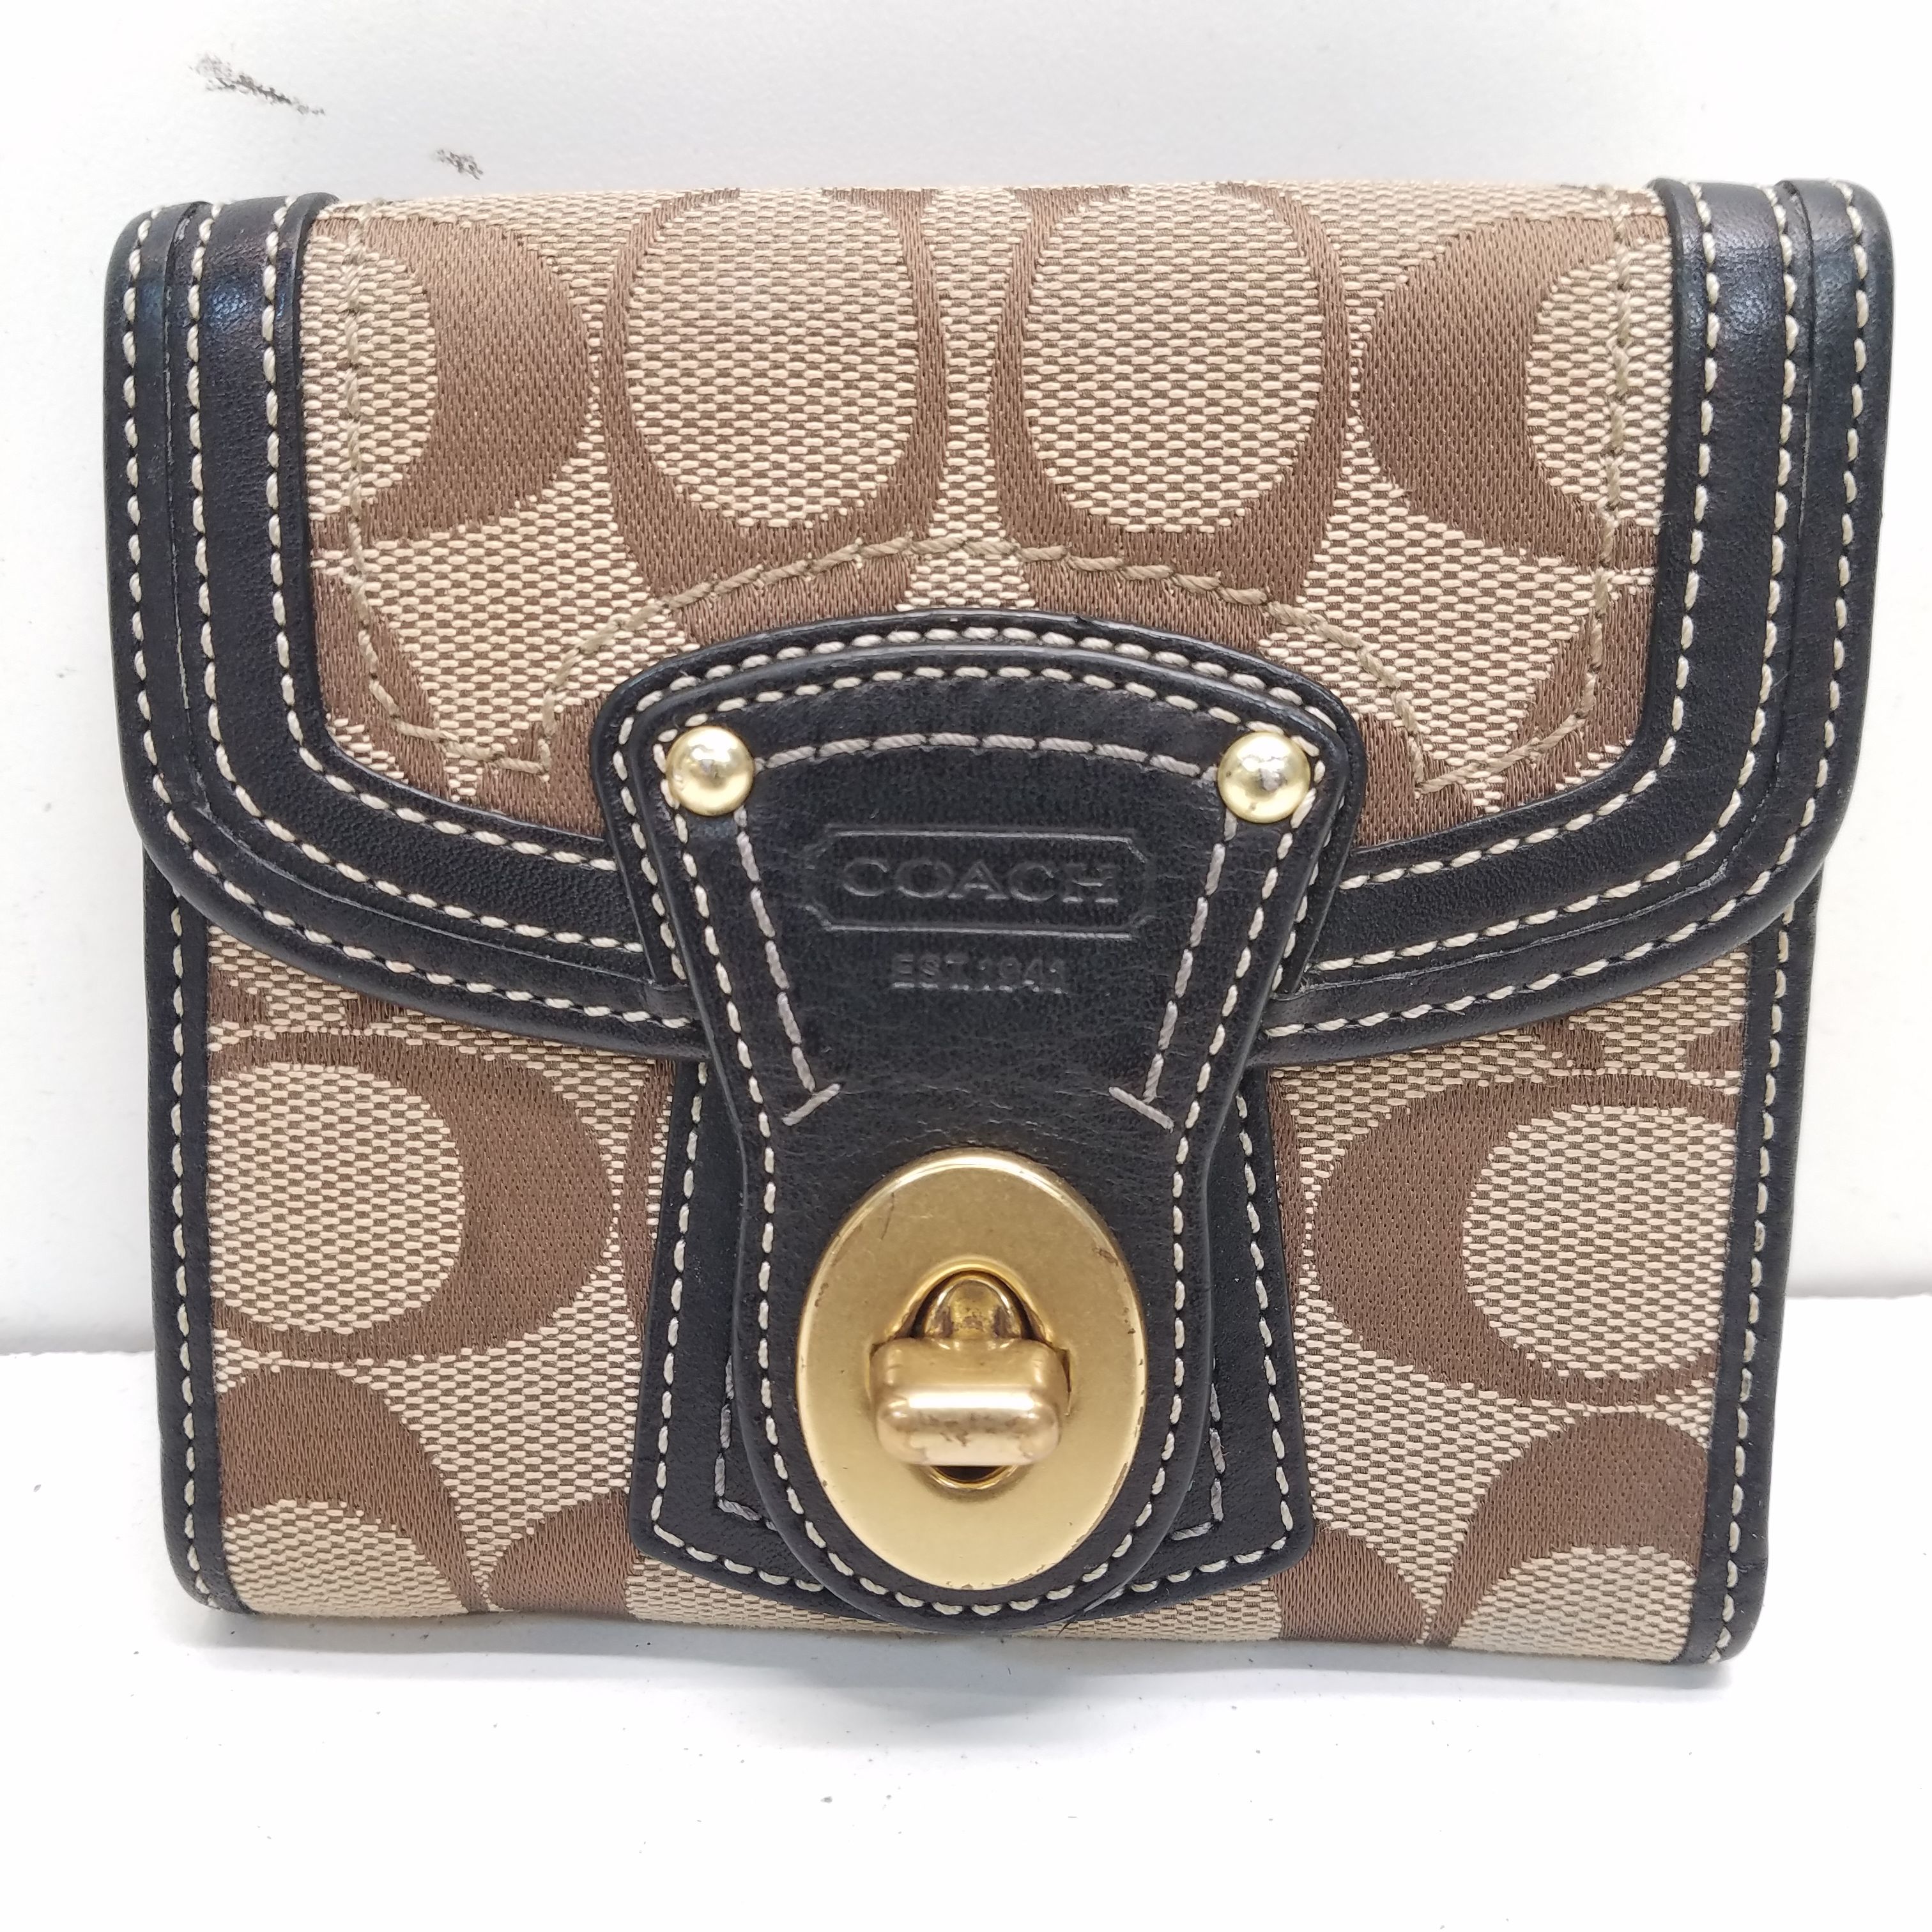 The Monogram Jacquard Trifold Wallet in Beige Multi